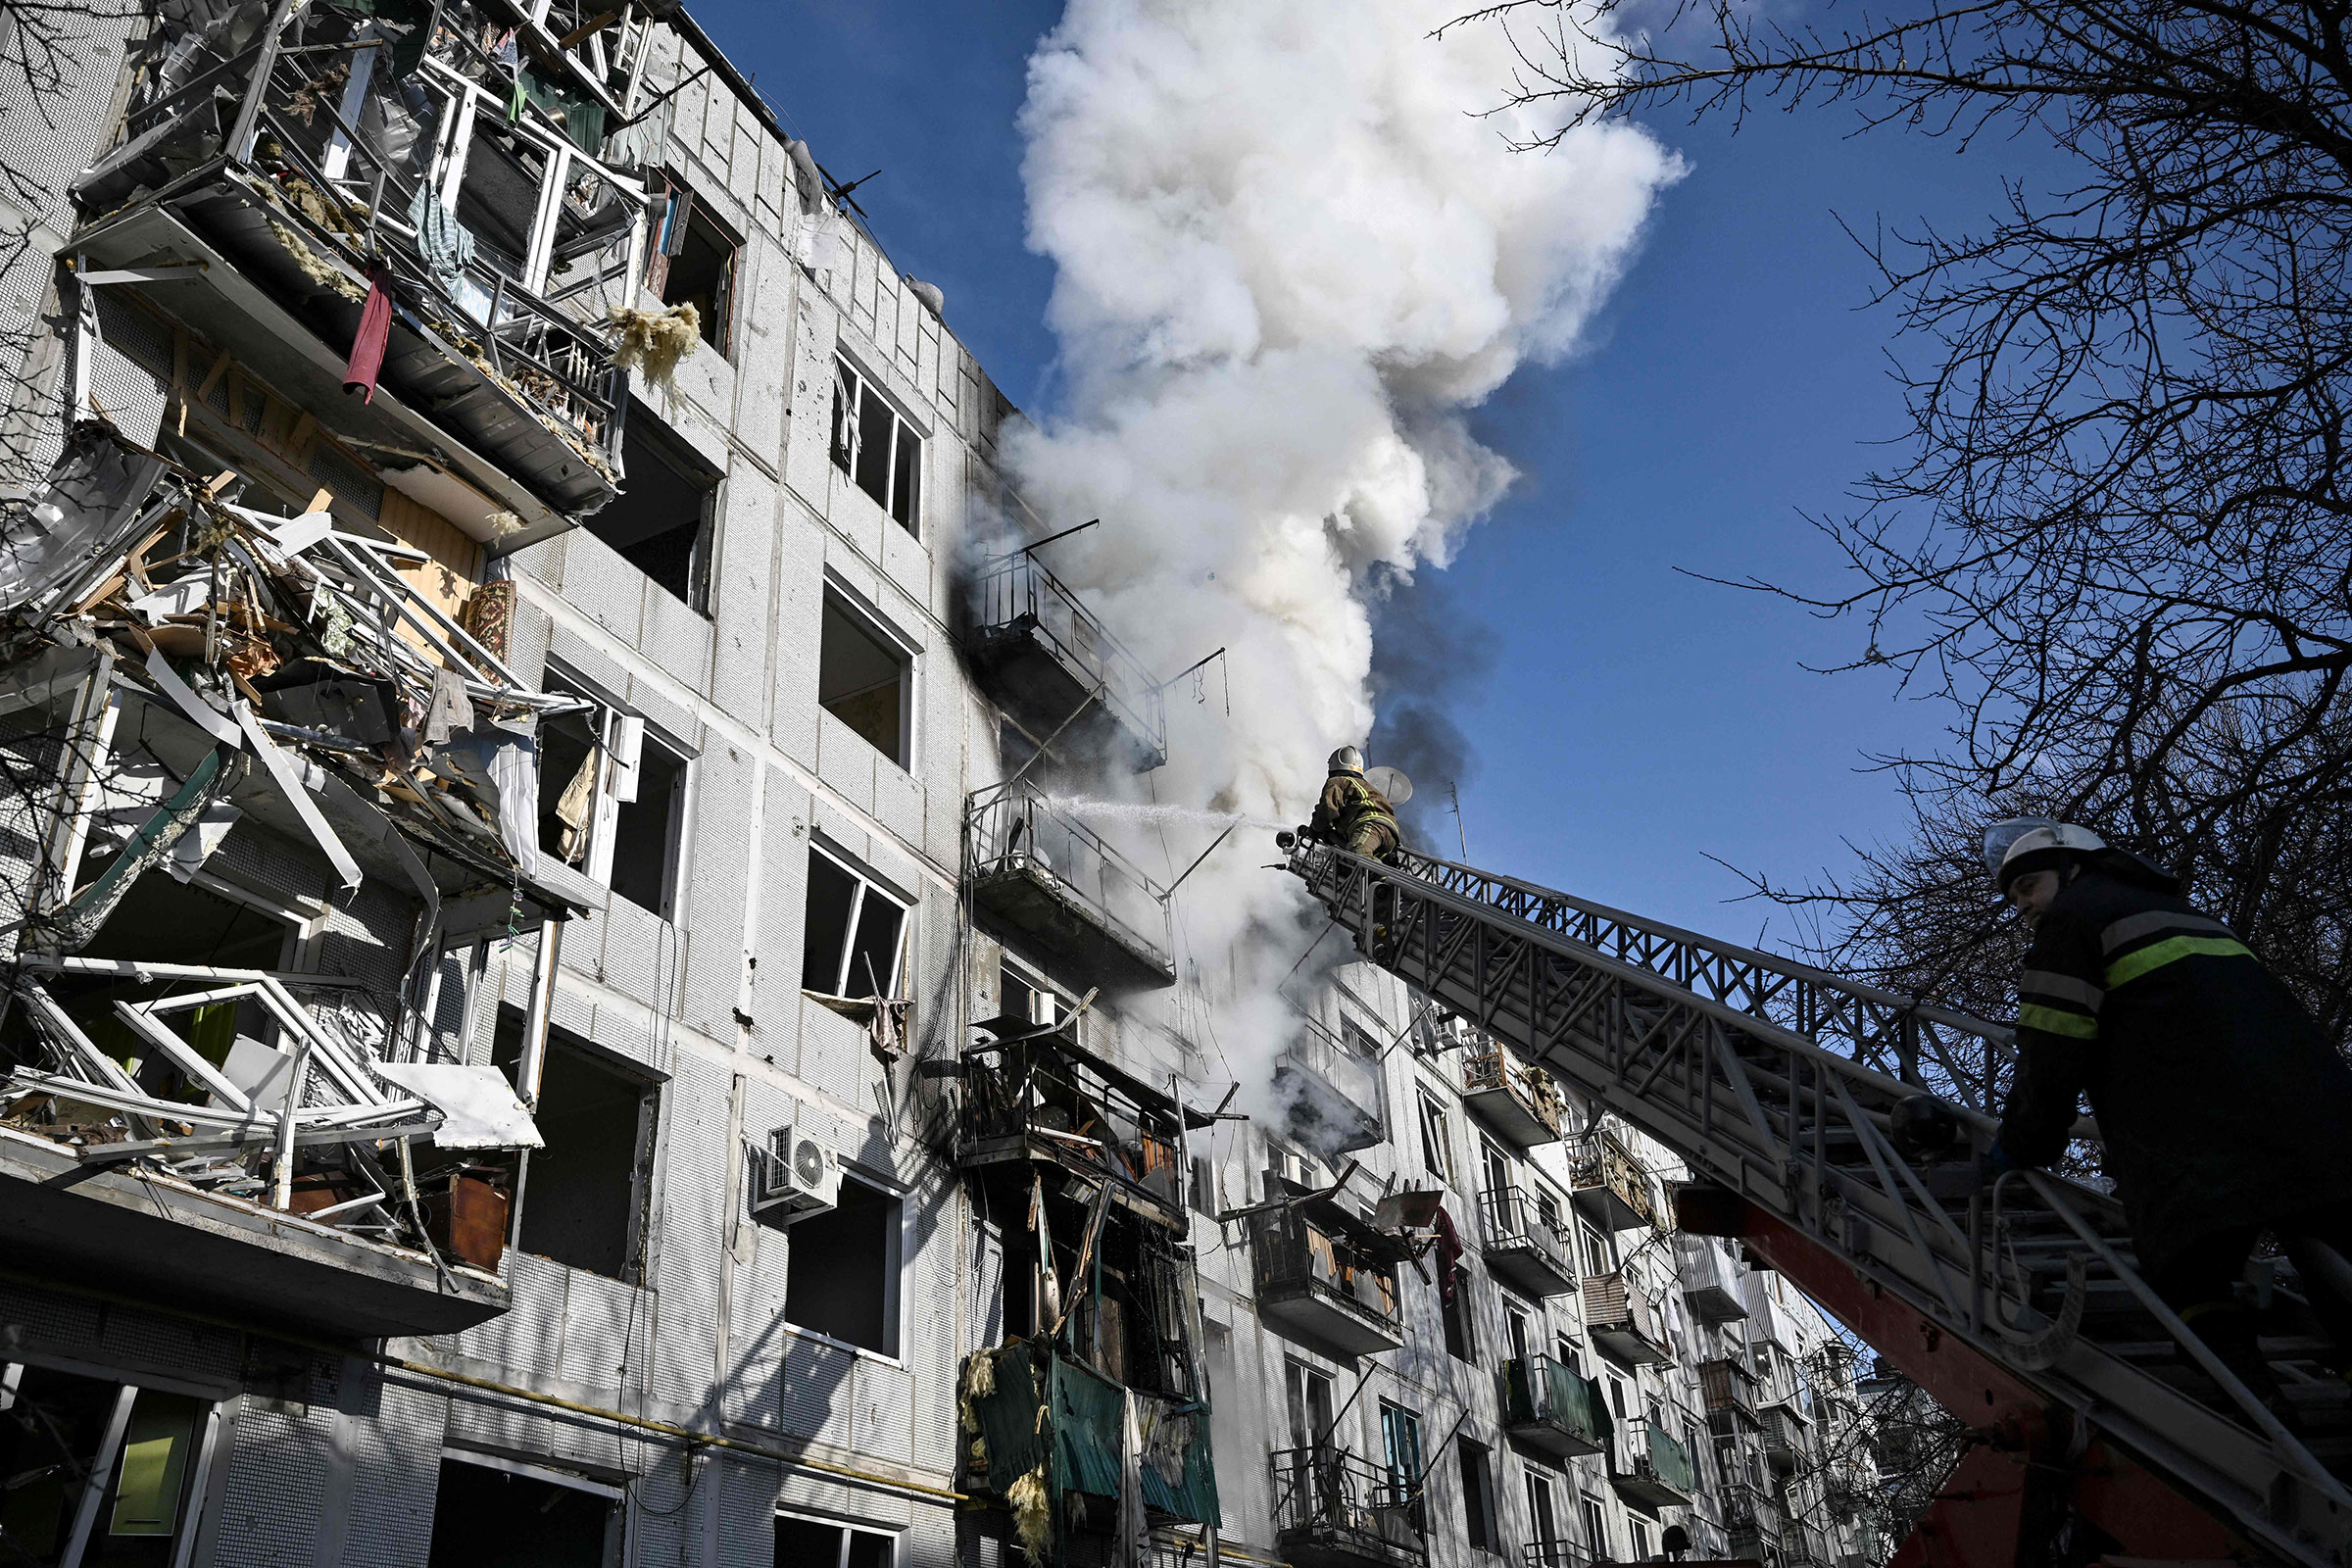 Firefighters work on a building fire after bombings on the eastern Ukraine town of Chuhuiv on Feb. 24, 2022. (Aris Messinis—AFP/Getty Images)